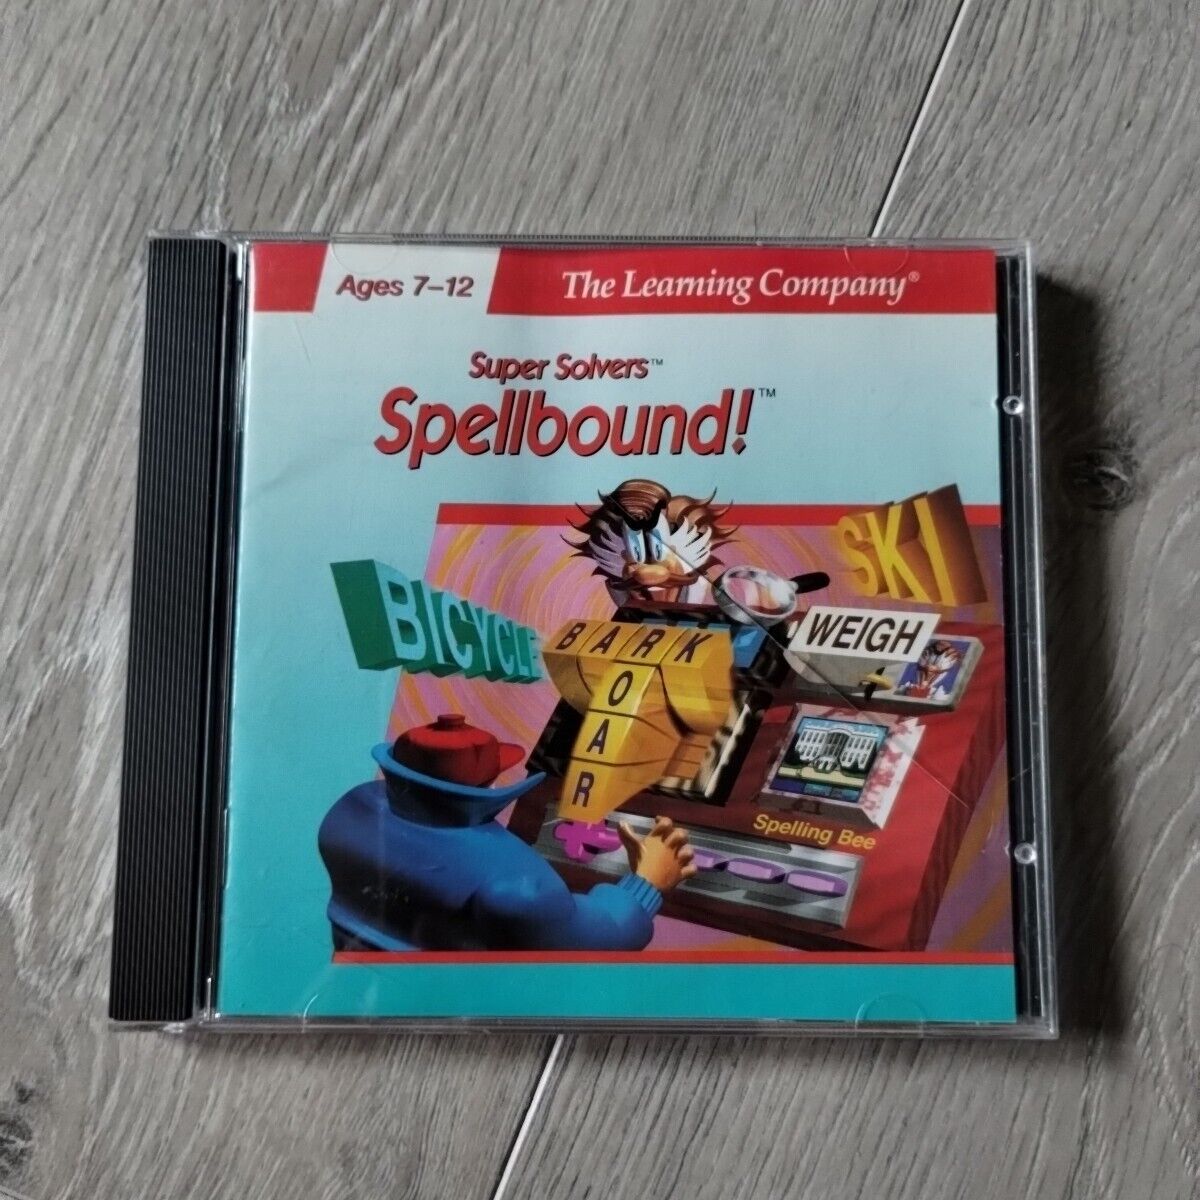 Super Solvers Spellbound The Learning Company PC, 1994 The Learning Company